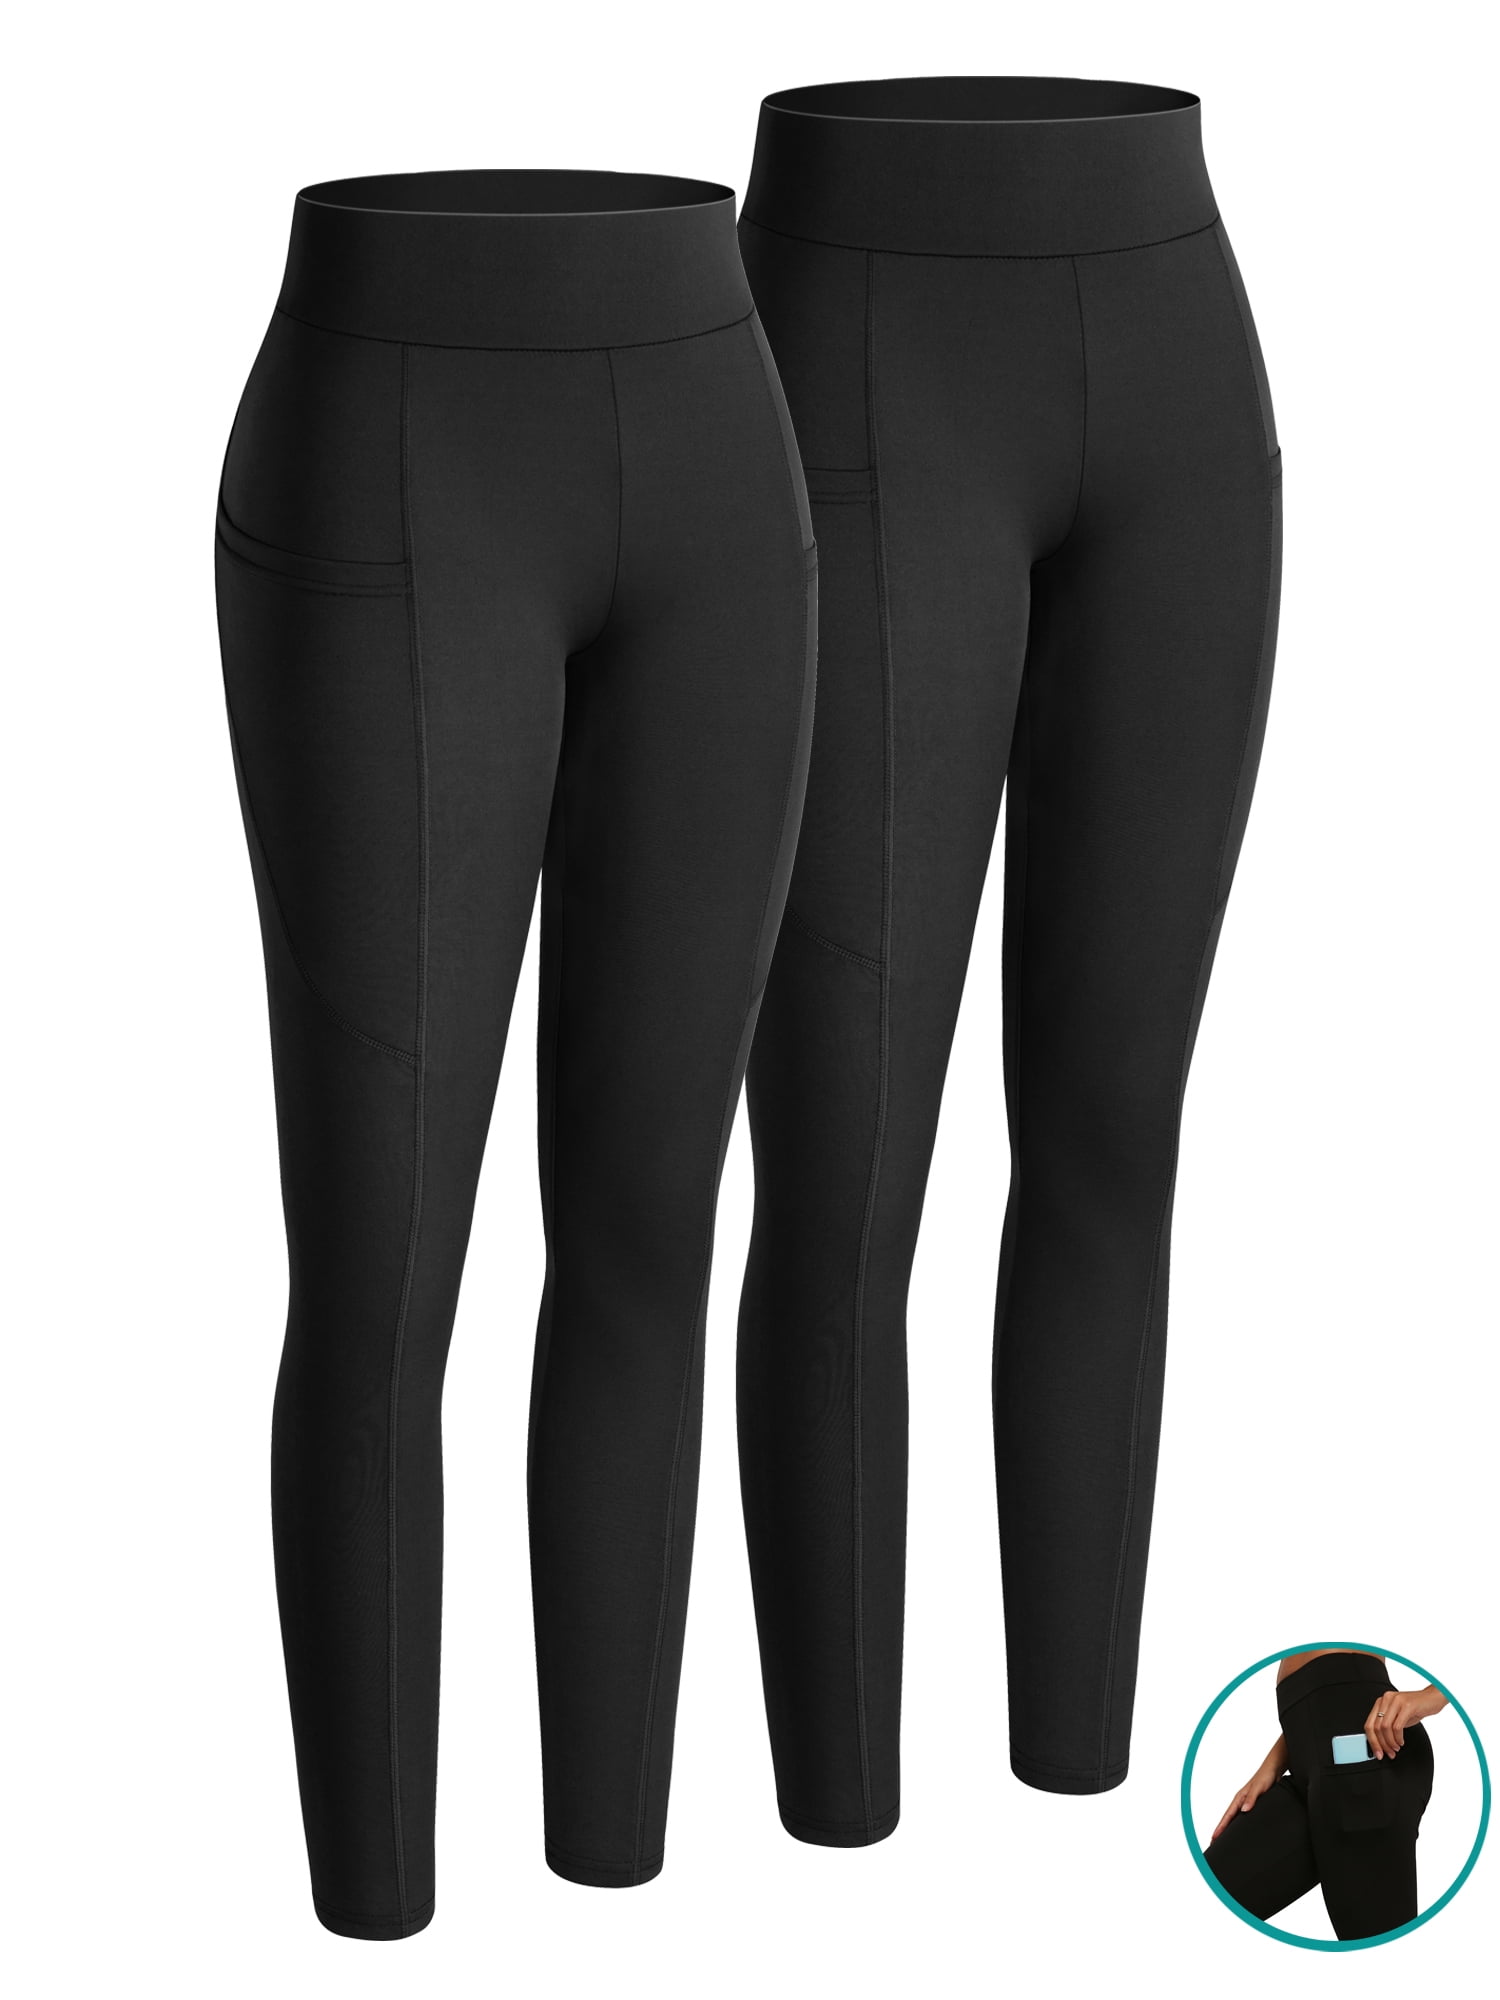 Keolorn High Waist Yoga Pants with Pockets Tummy Control Workout Leggings for Women 4 Way Stretch Leggings with Pockets 